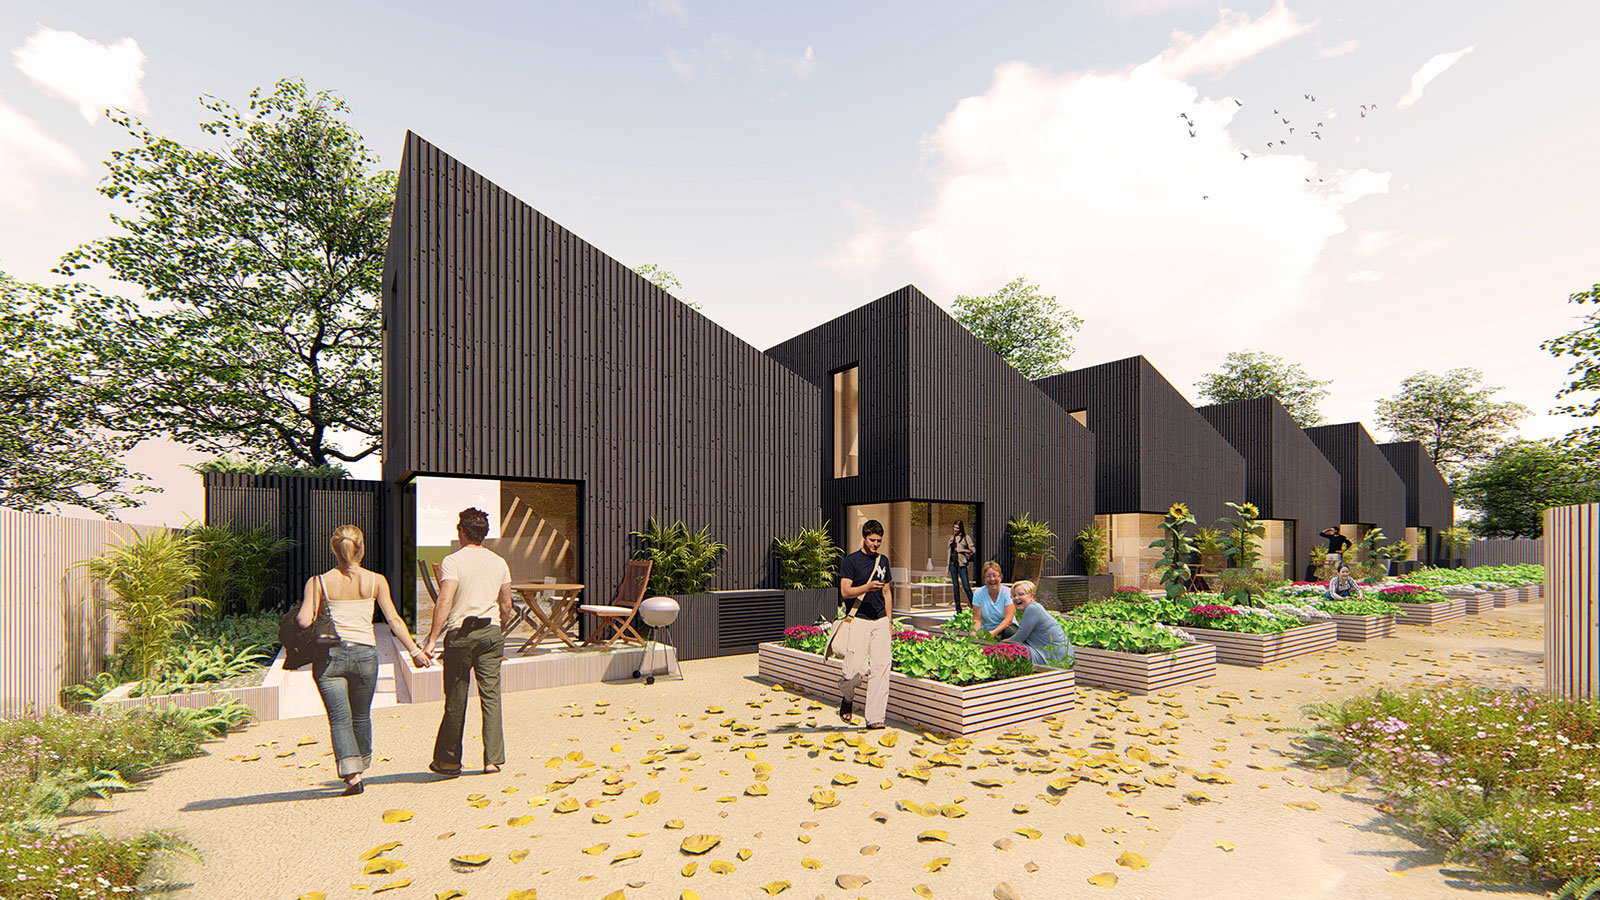 Our Gap House concept proposes the building of affordable, eco-homes on disused garages in Bristol.